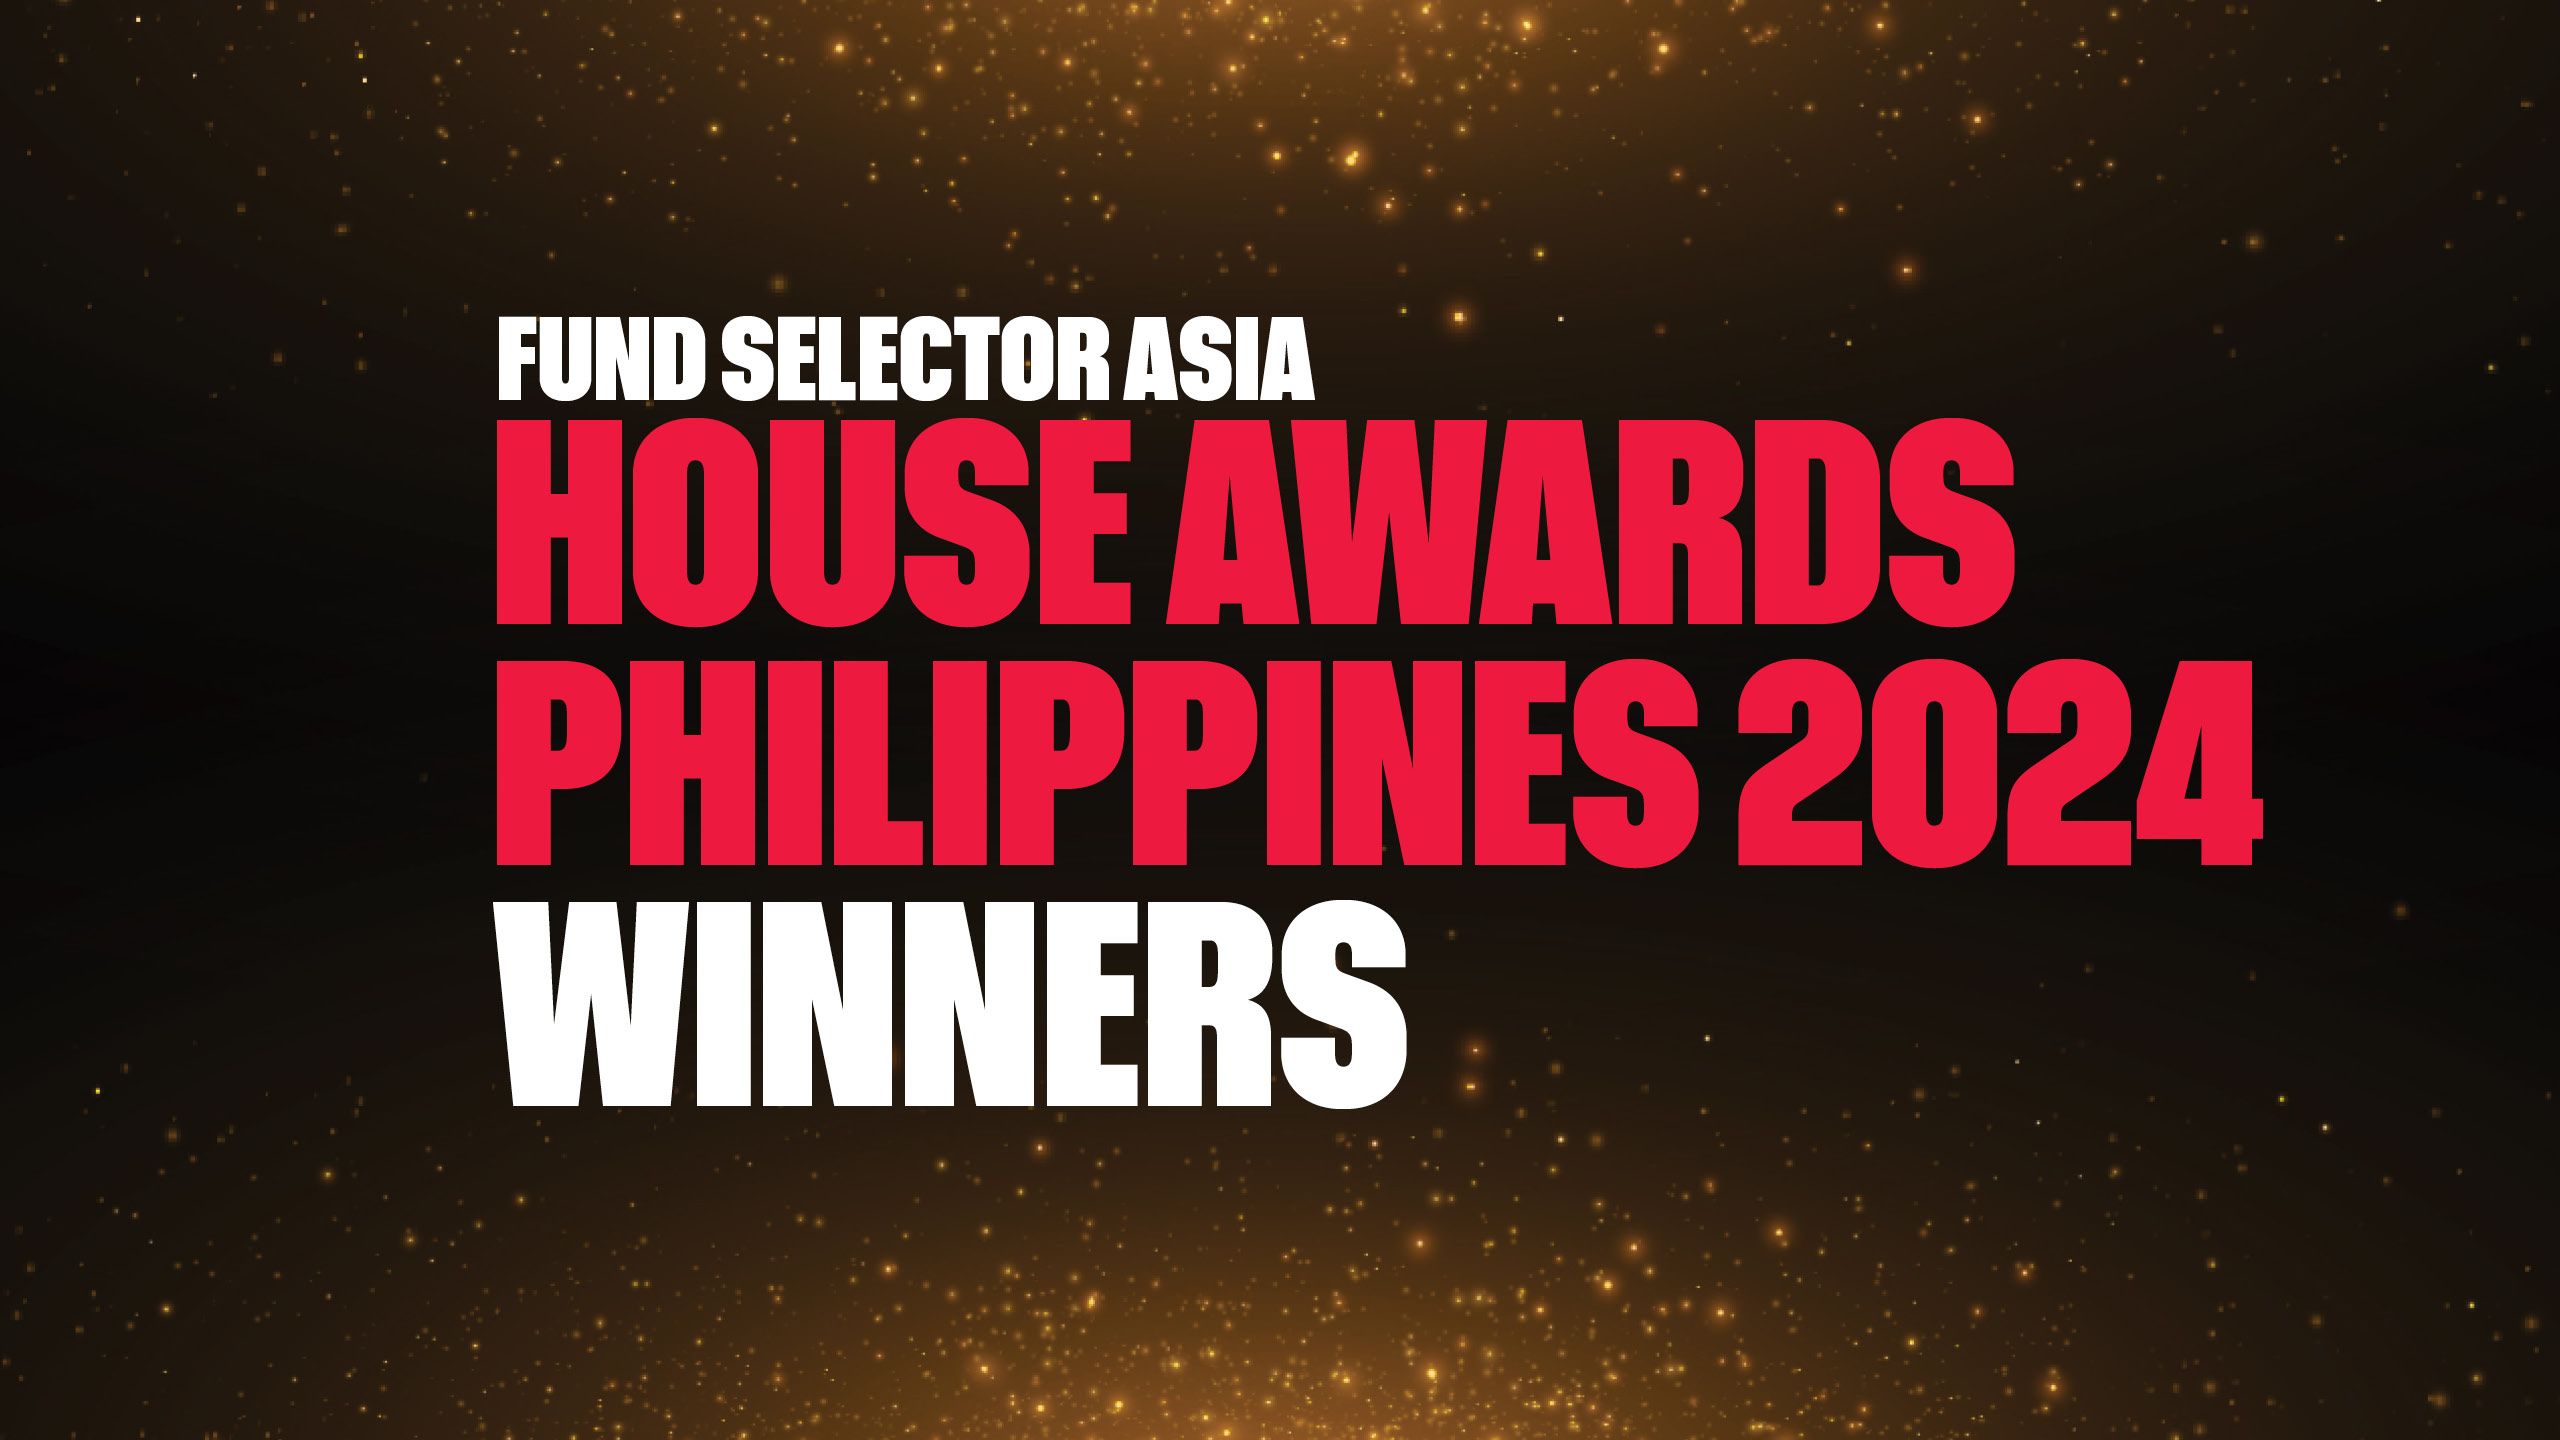 Winners of the 2024 FSA House Awards for Philippines are… Fund